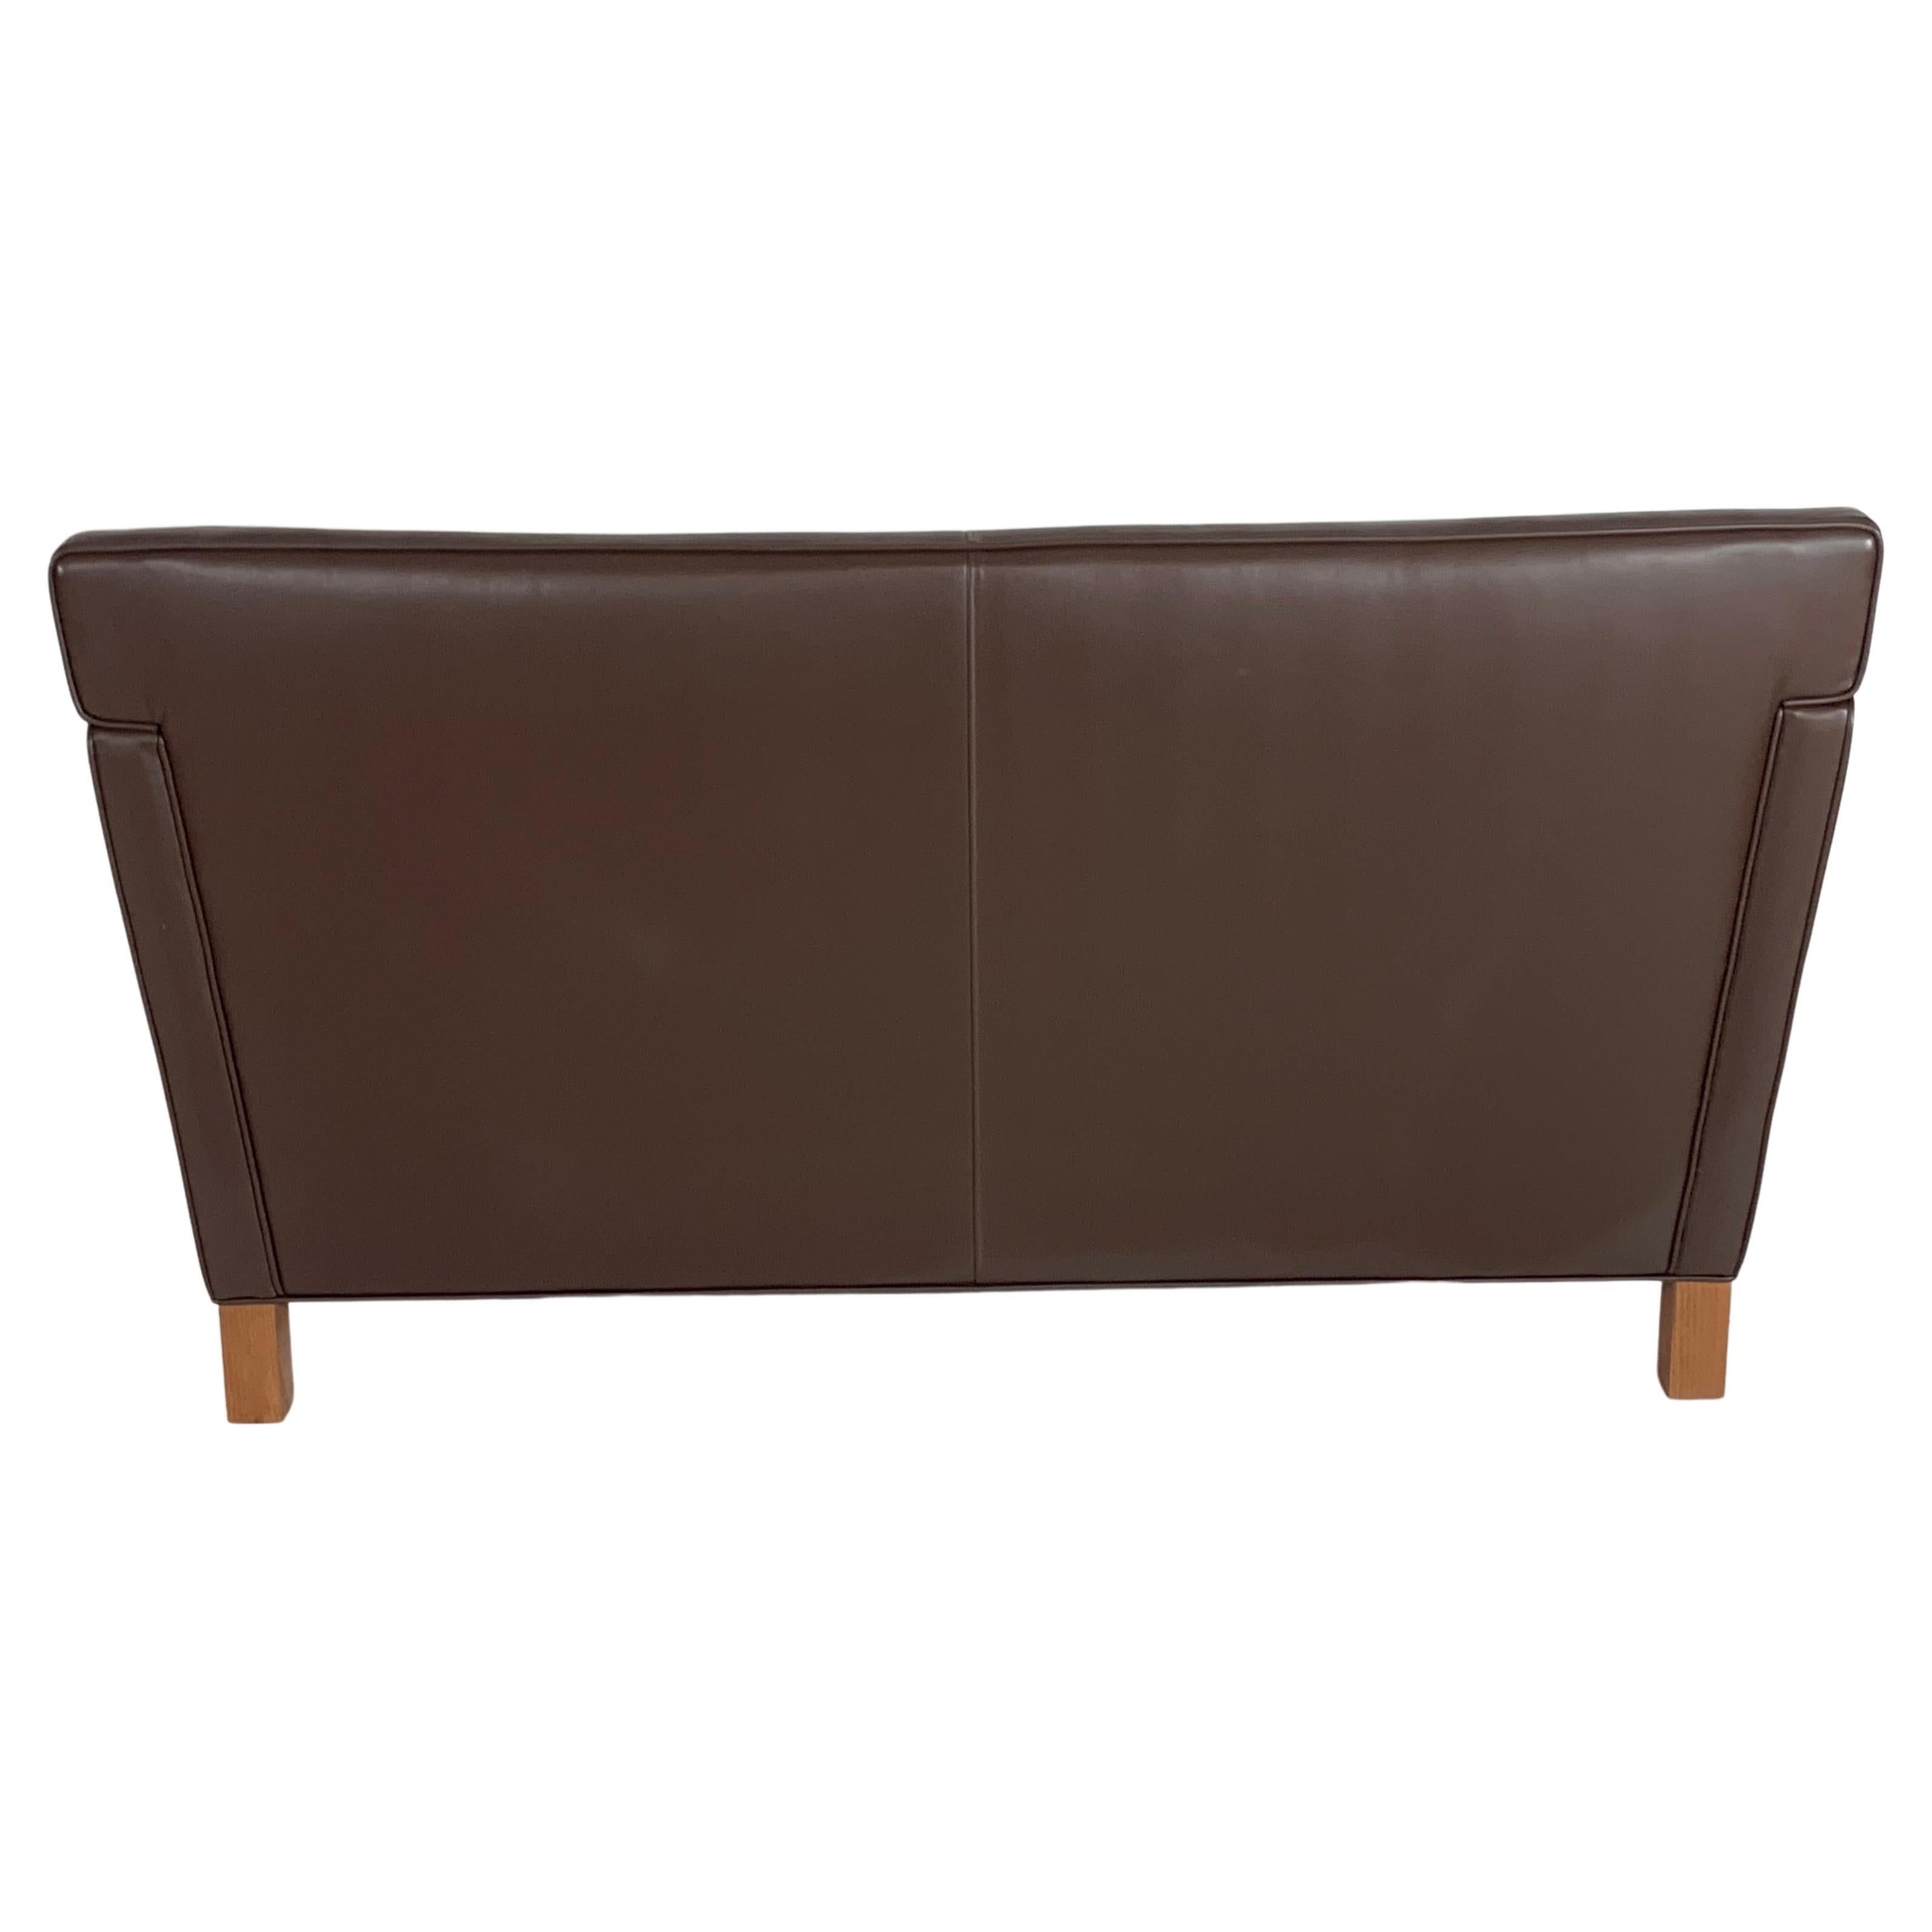 Ludwig Mies van der Rohe Krefeld Settee or Sofa in Dark Brown Leather for Knoll In Good Condition For Sale In St. Louis, MO